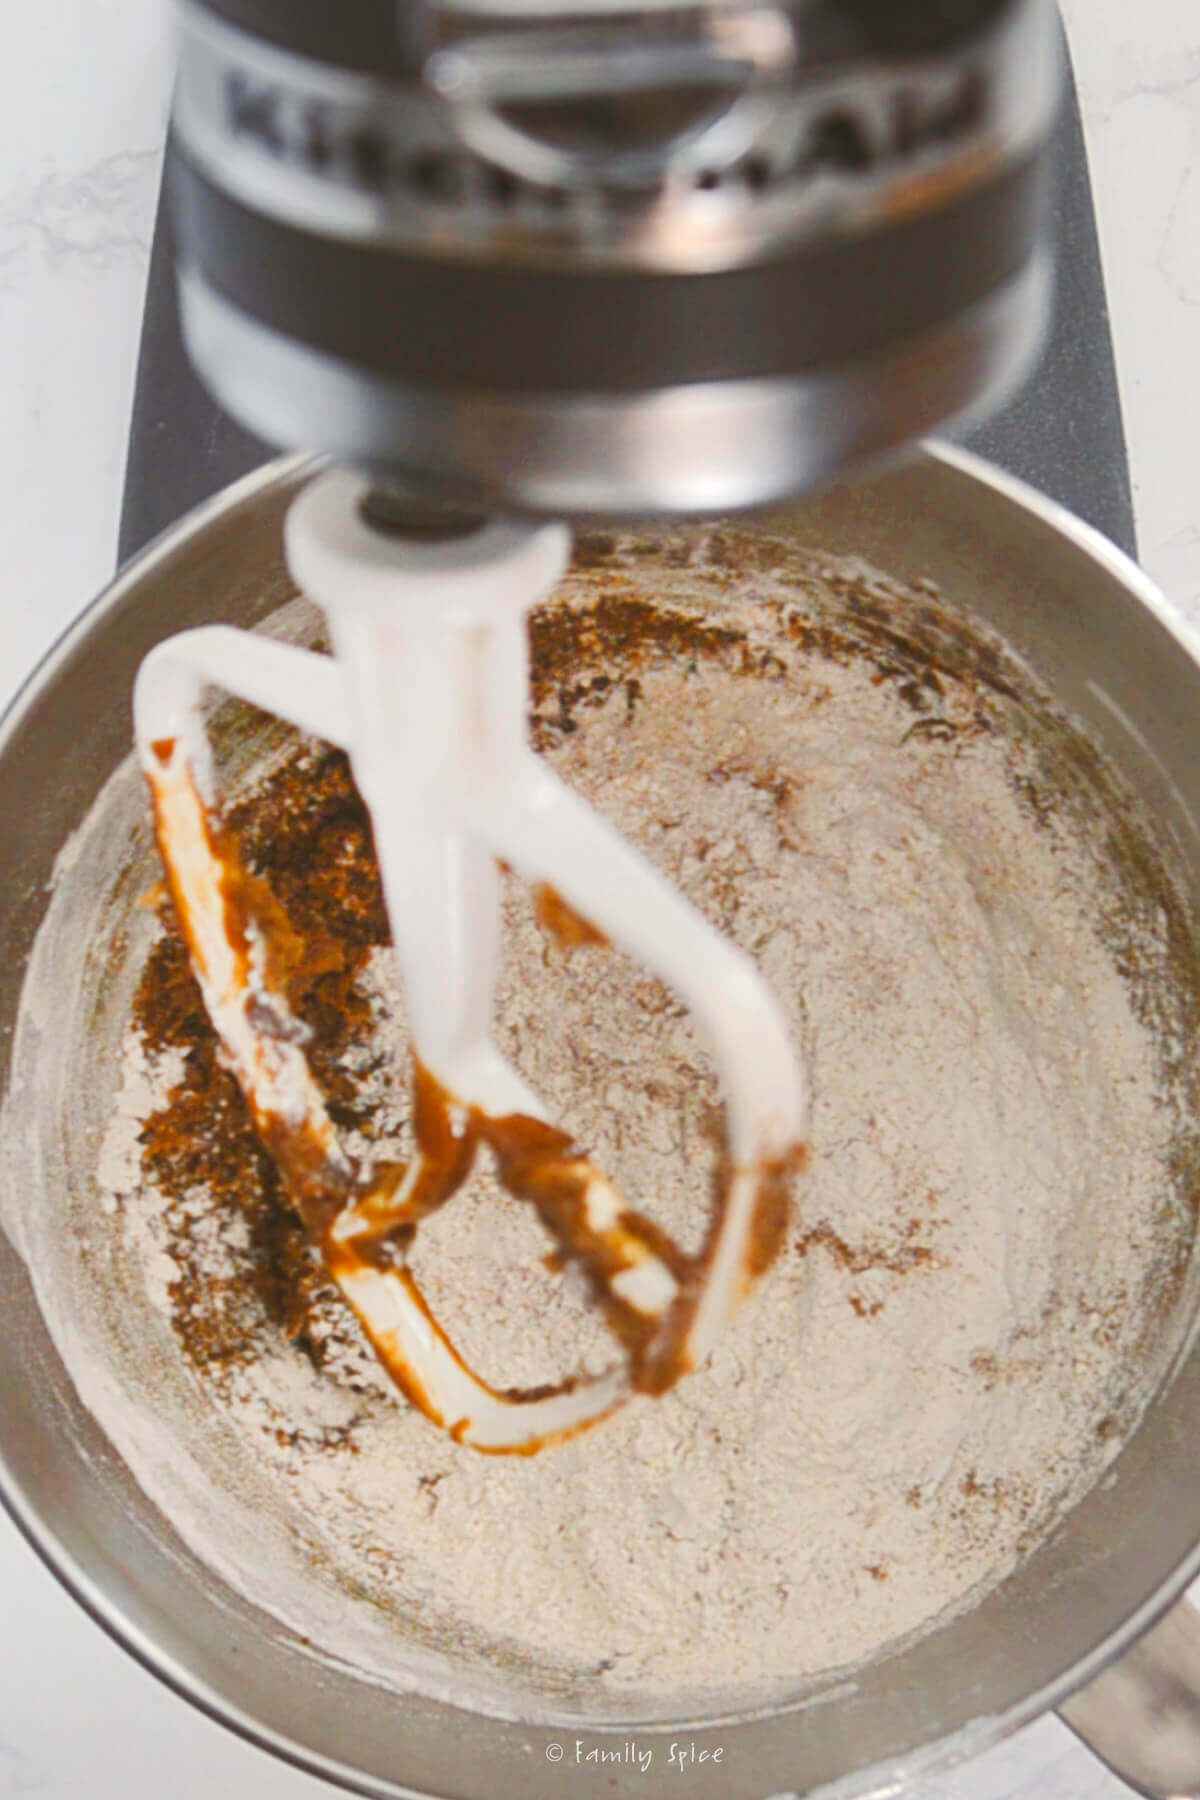 A stand mixer with flour mix added into the bowl holding the molasses mixture